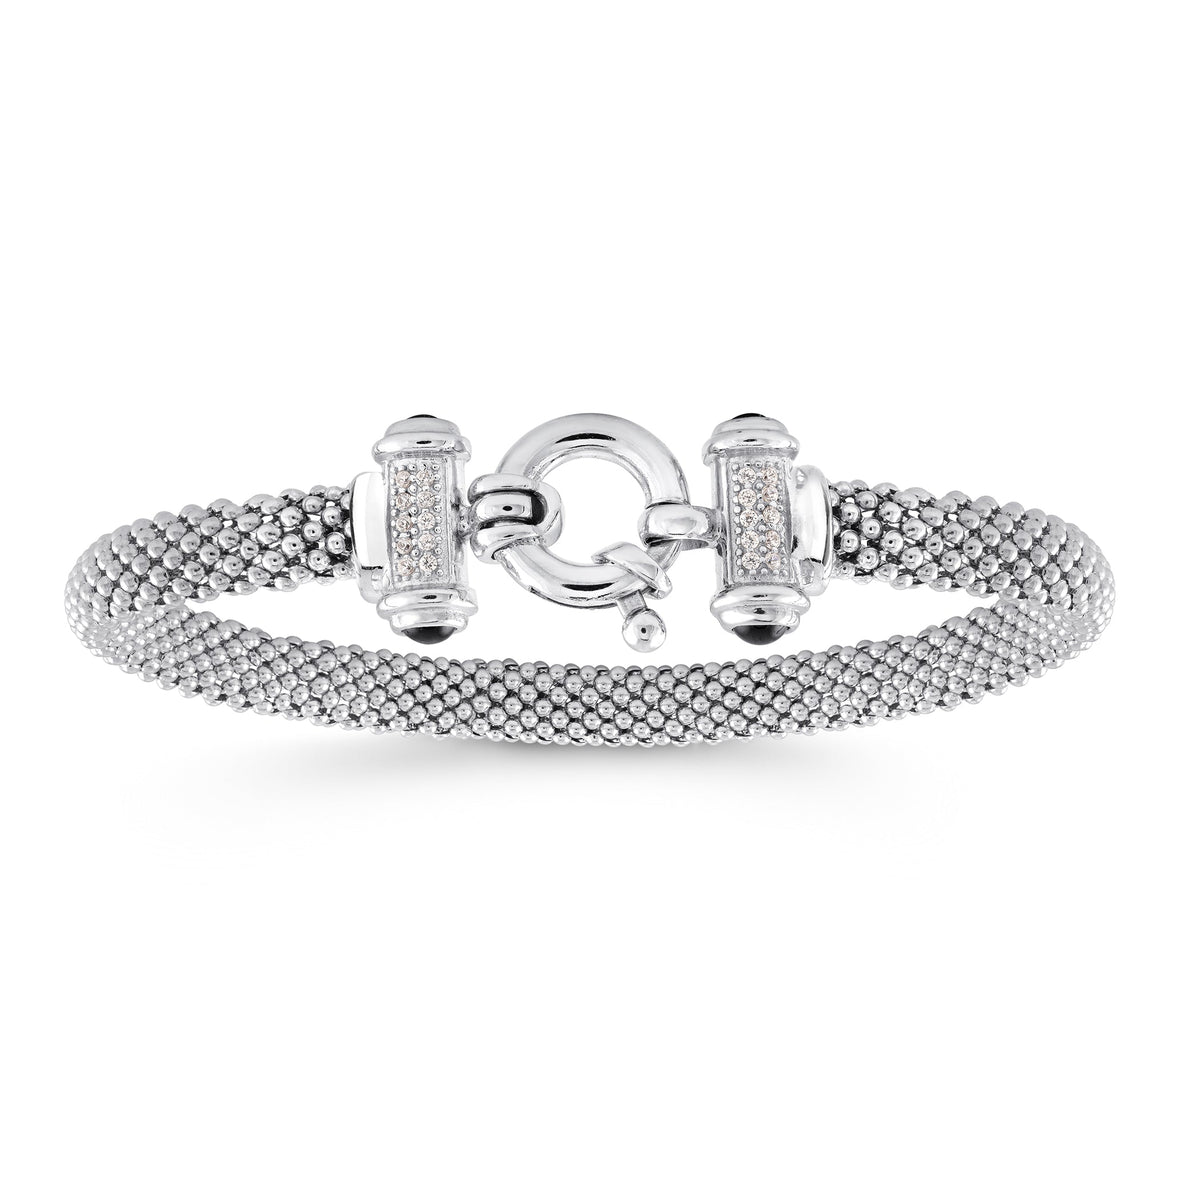 Mesh Bracelet With Round Buckle in White